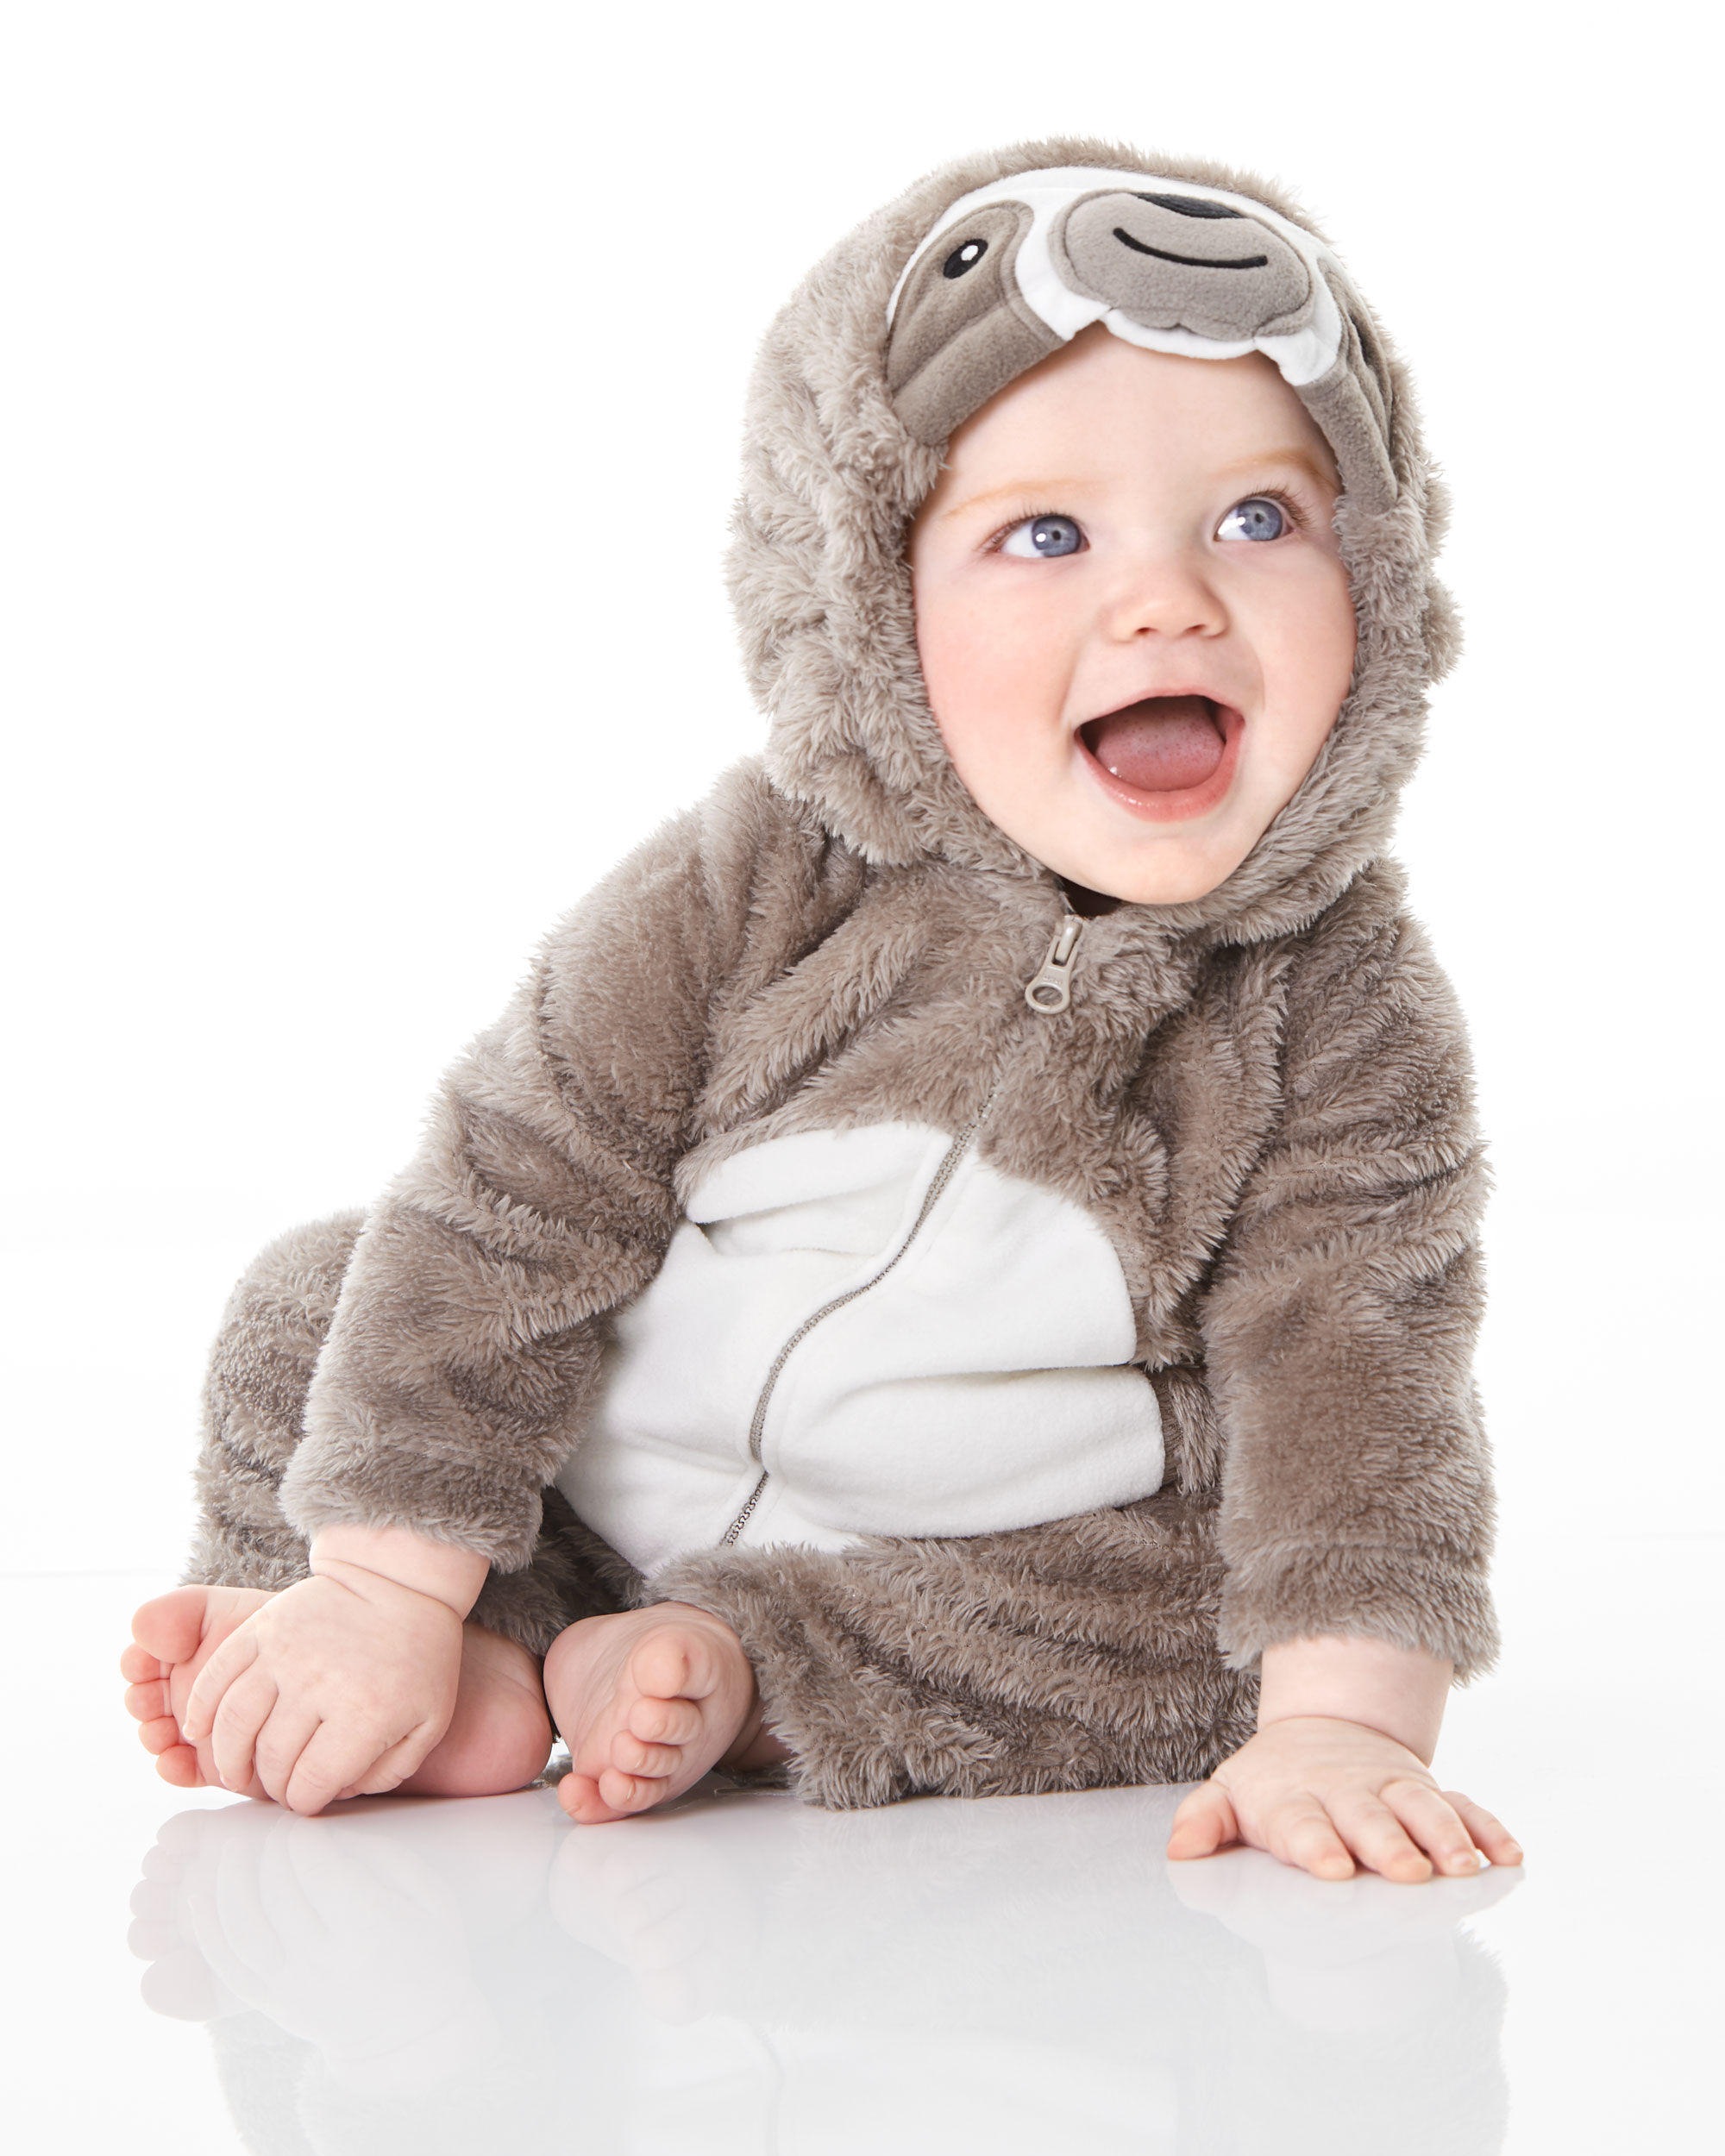 baby sloth outfit